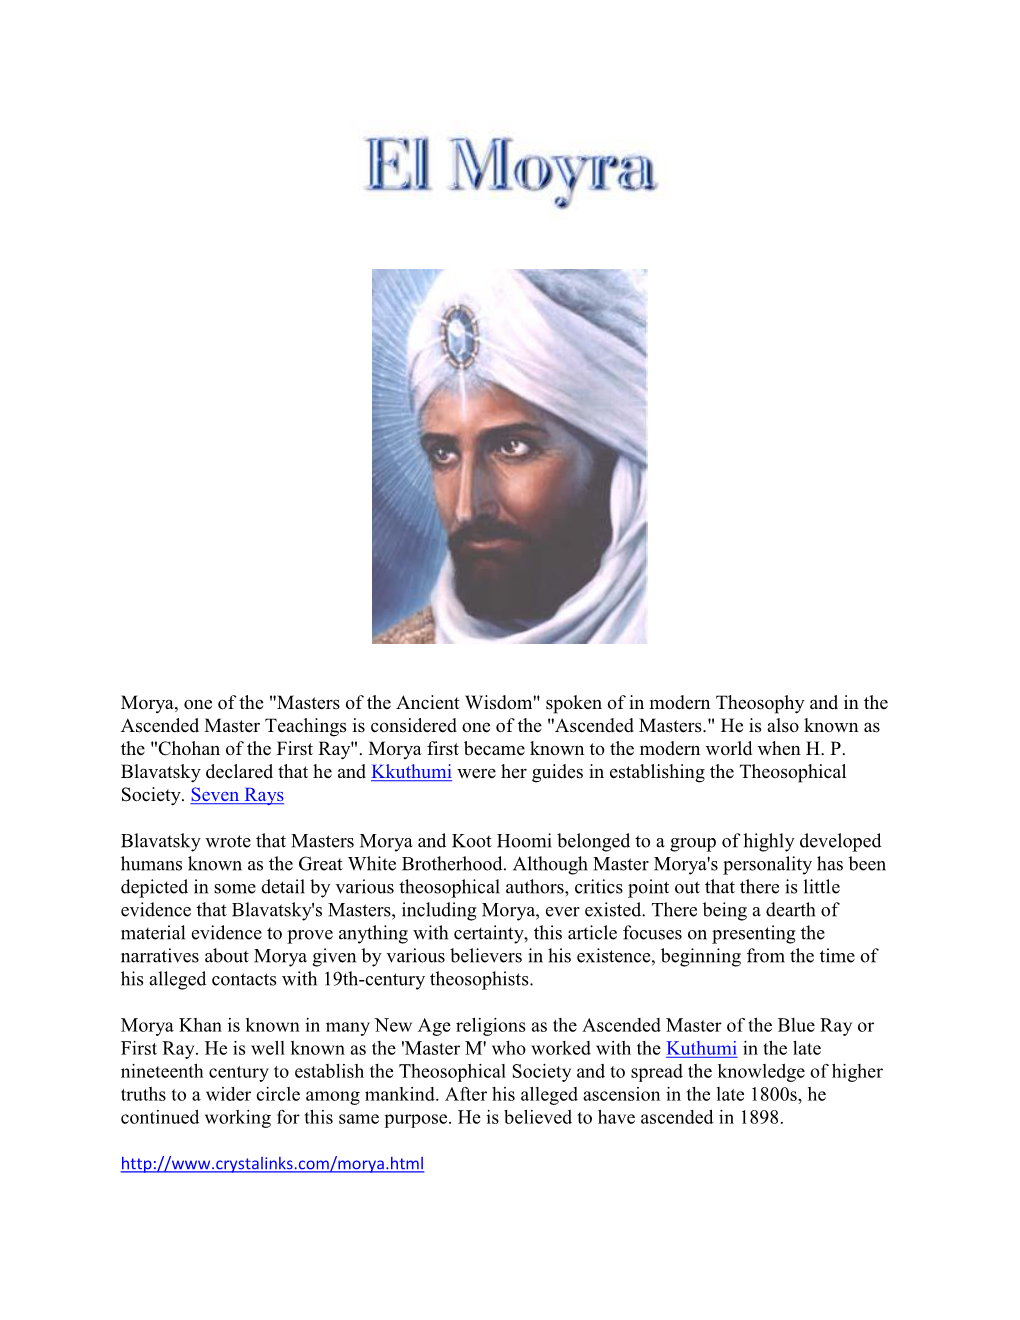 Morya, One of the "Masters of the Ancient Wisdom" Spoken of in Modern Theosophy and in the Ascended Master Teachings I